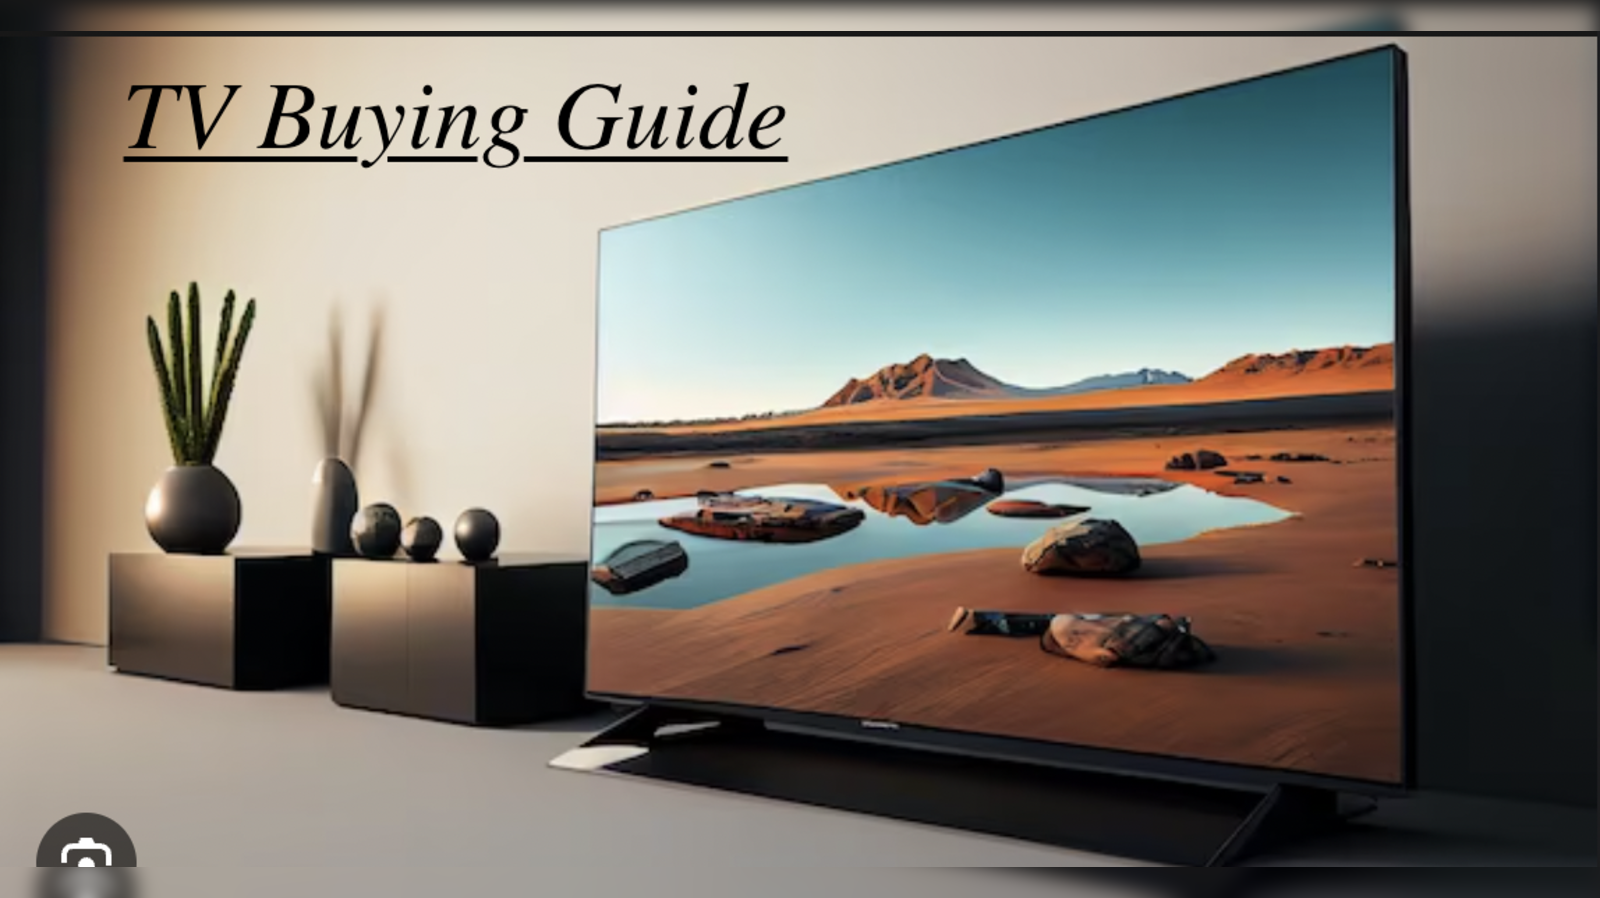 TV Buying Guide - How to choose the right TV for the best